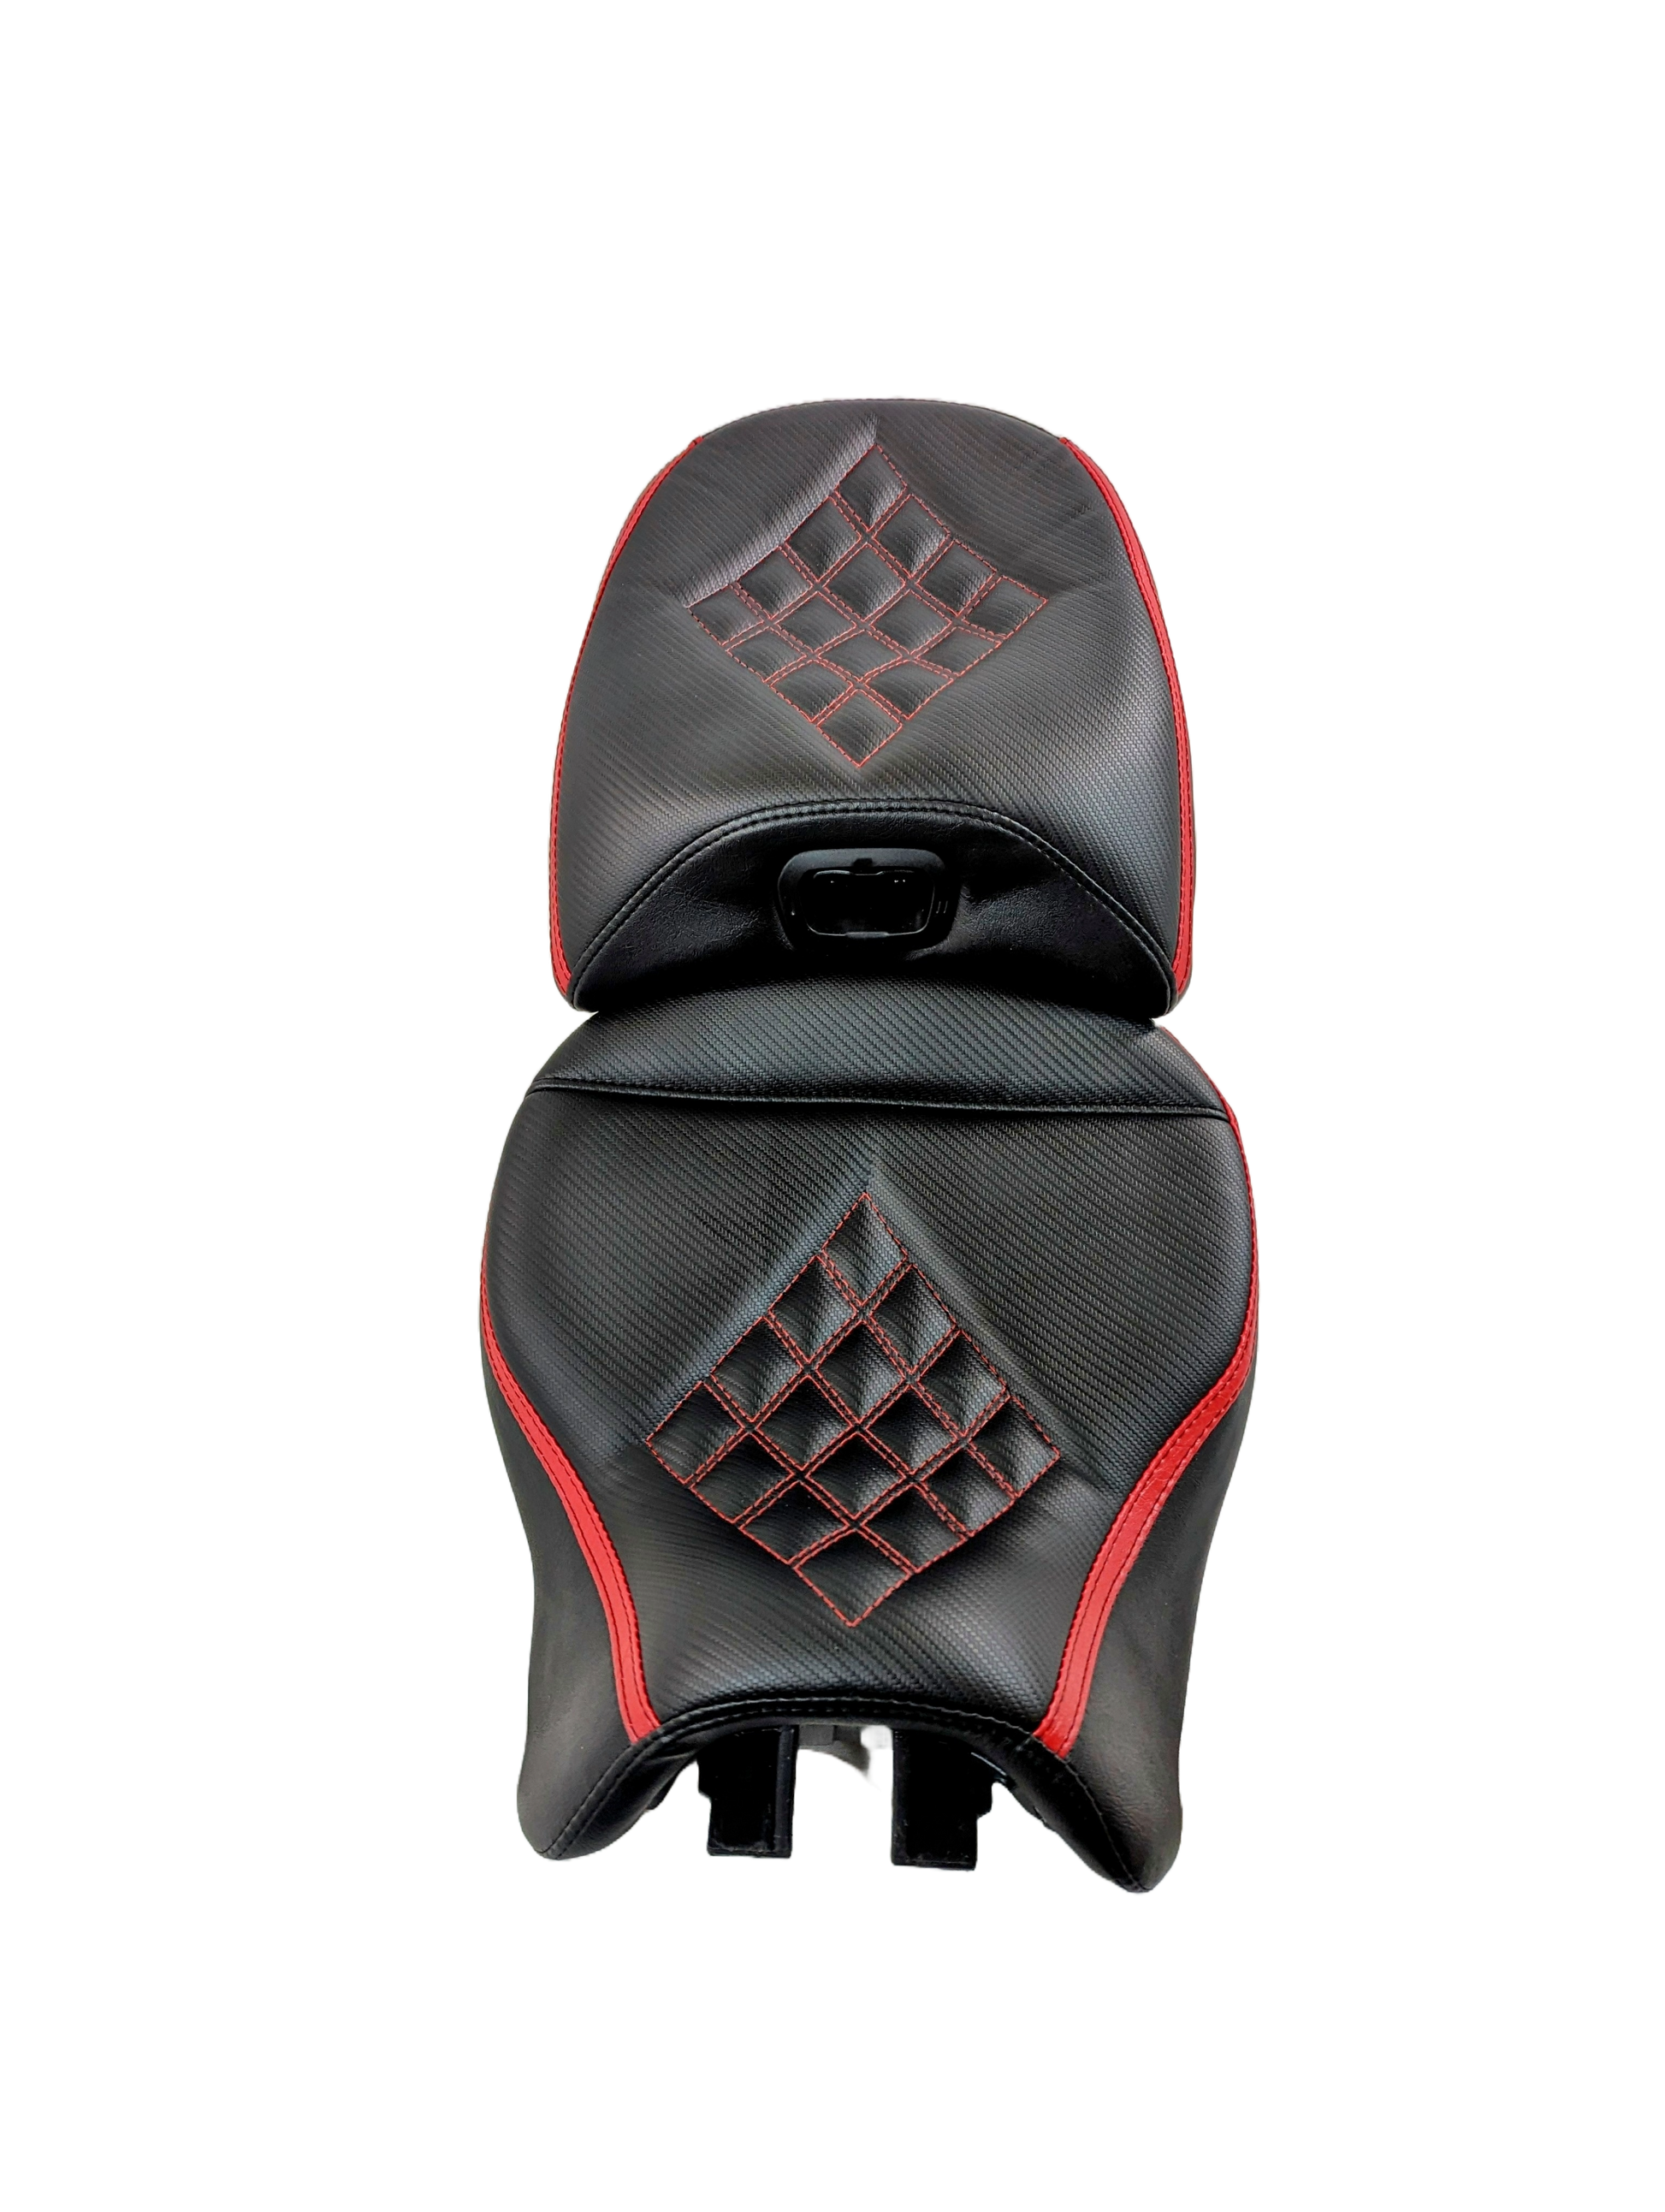 Ducati Multistrada V4 seat in black carbon with red diamond inlay